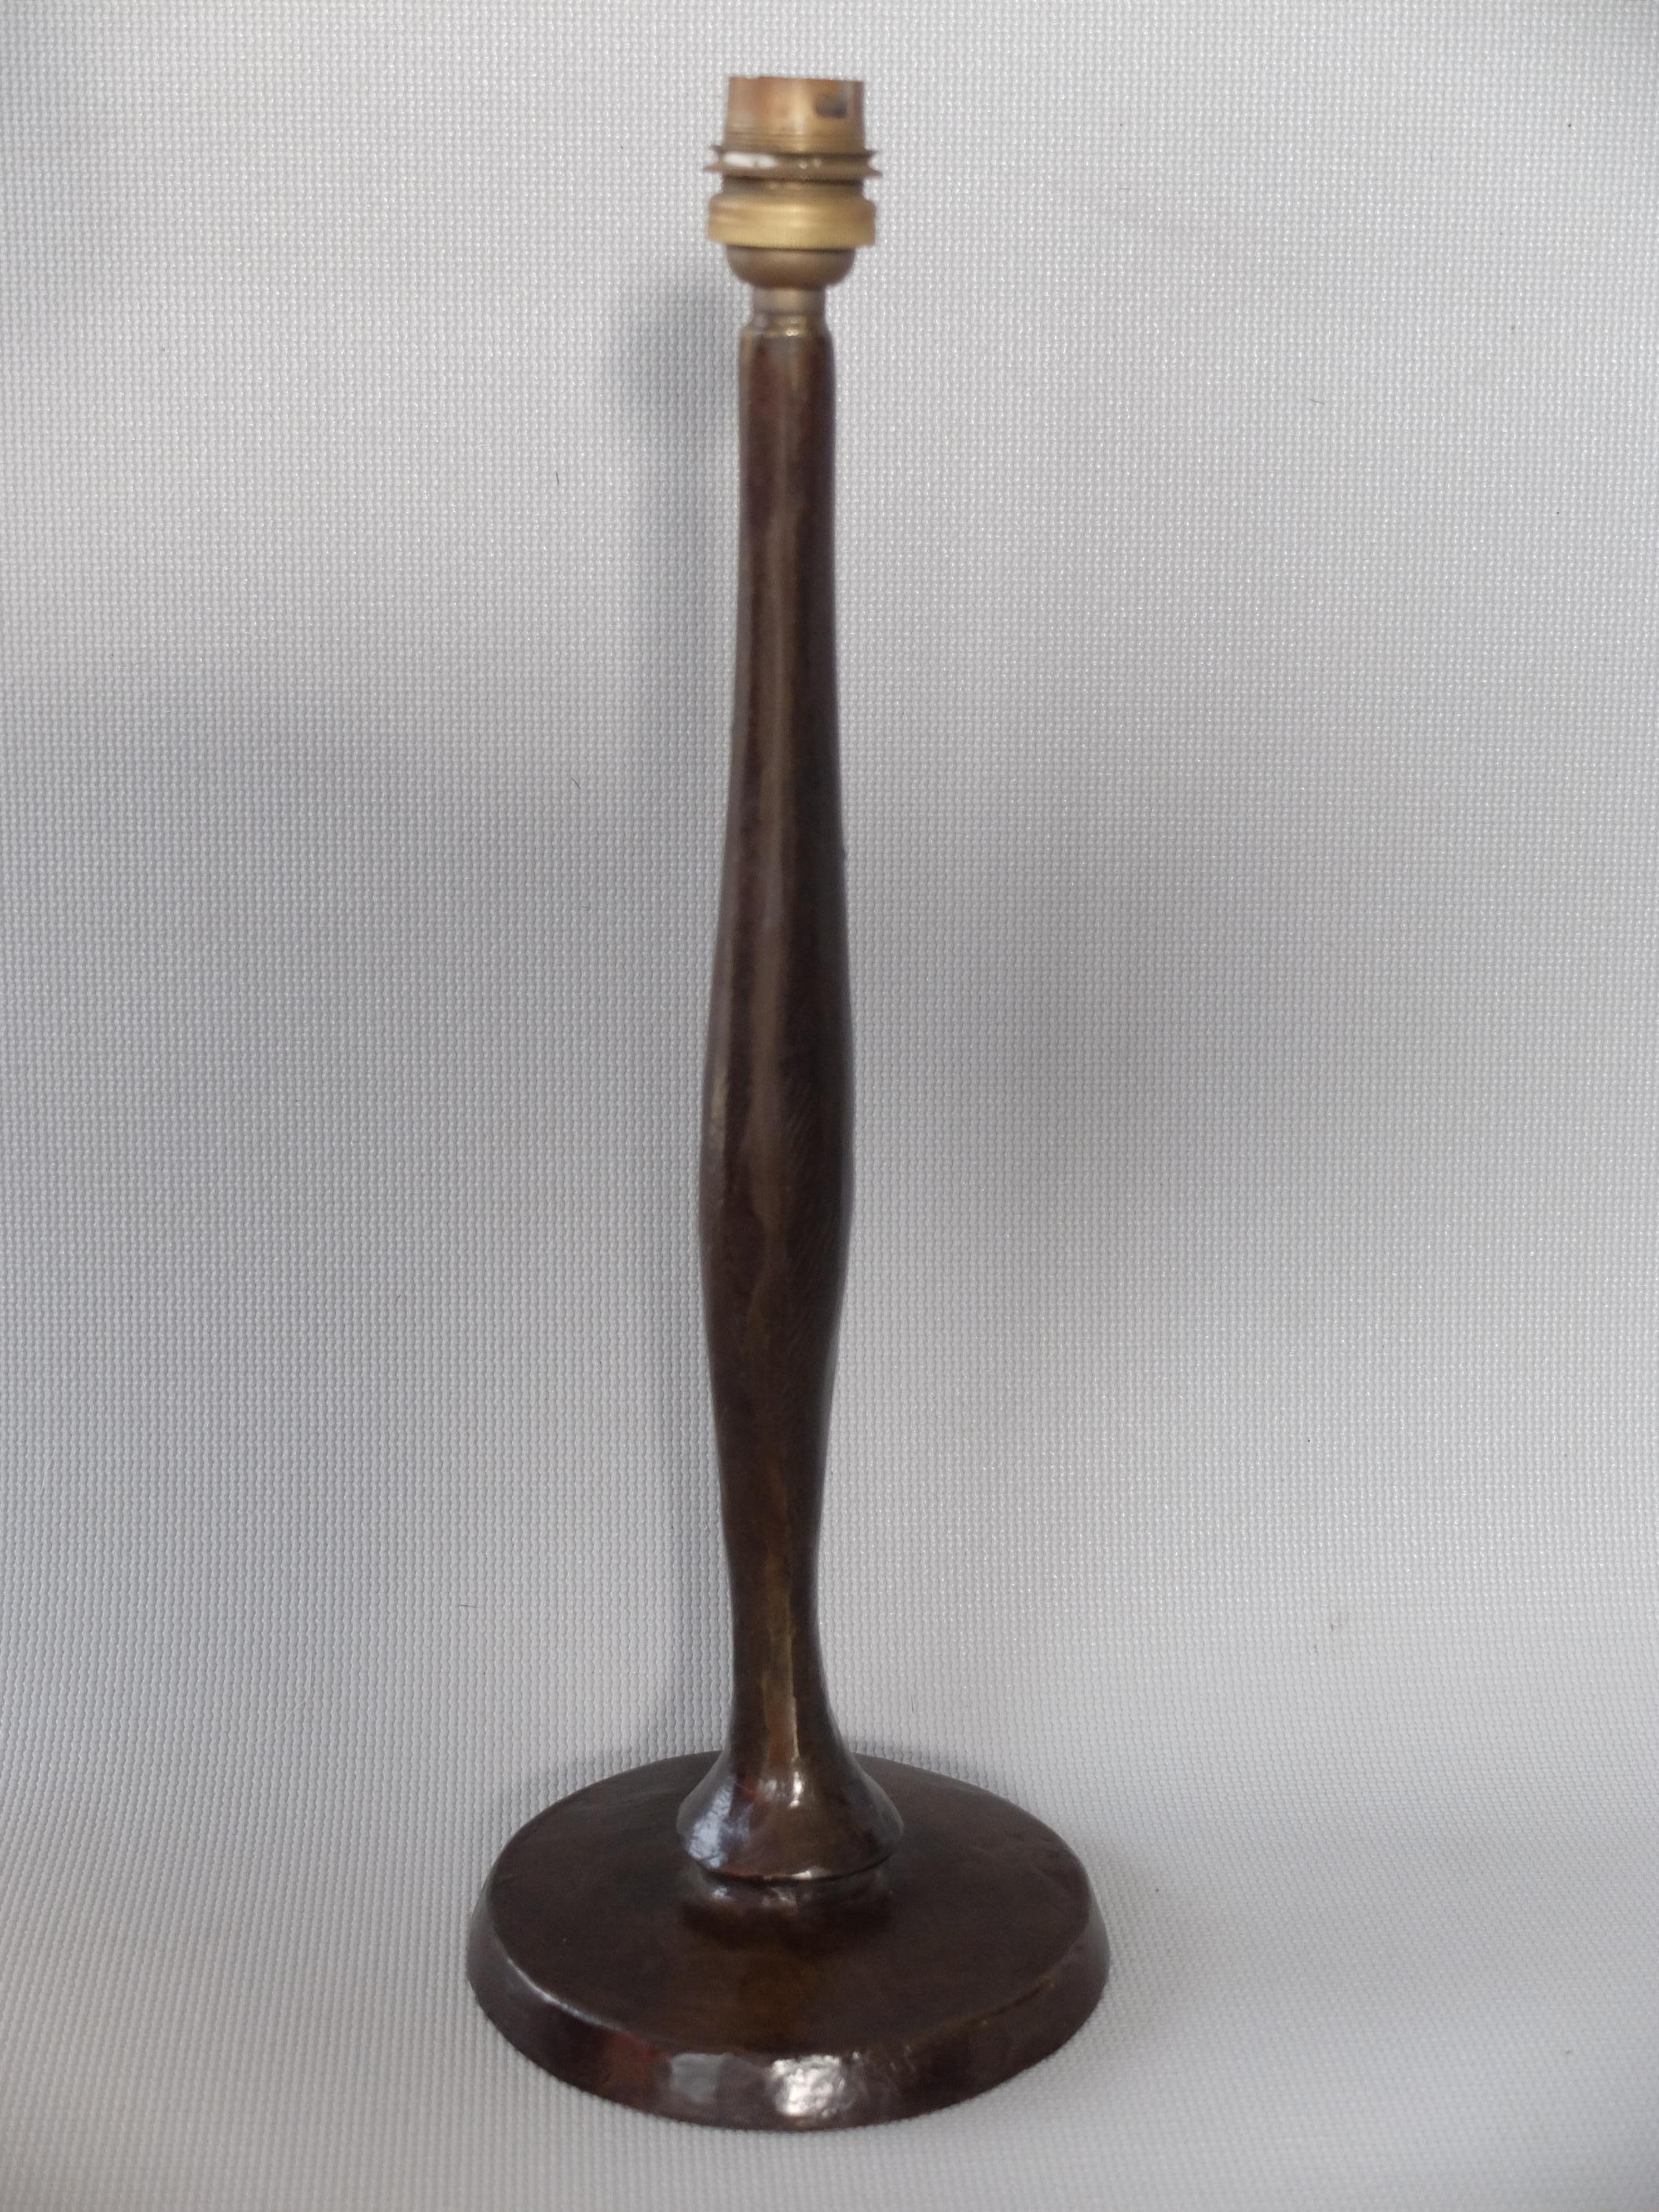 Forged Augustin Granet Table Lamp Solid Patinated Bronze Not Giacometti But, See Video For Sale